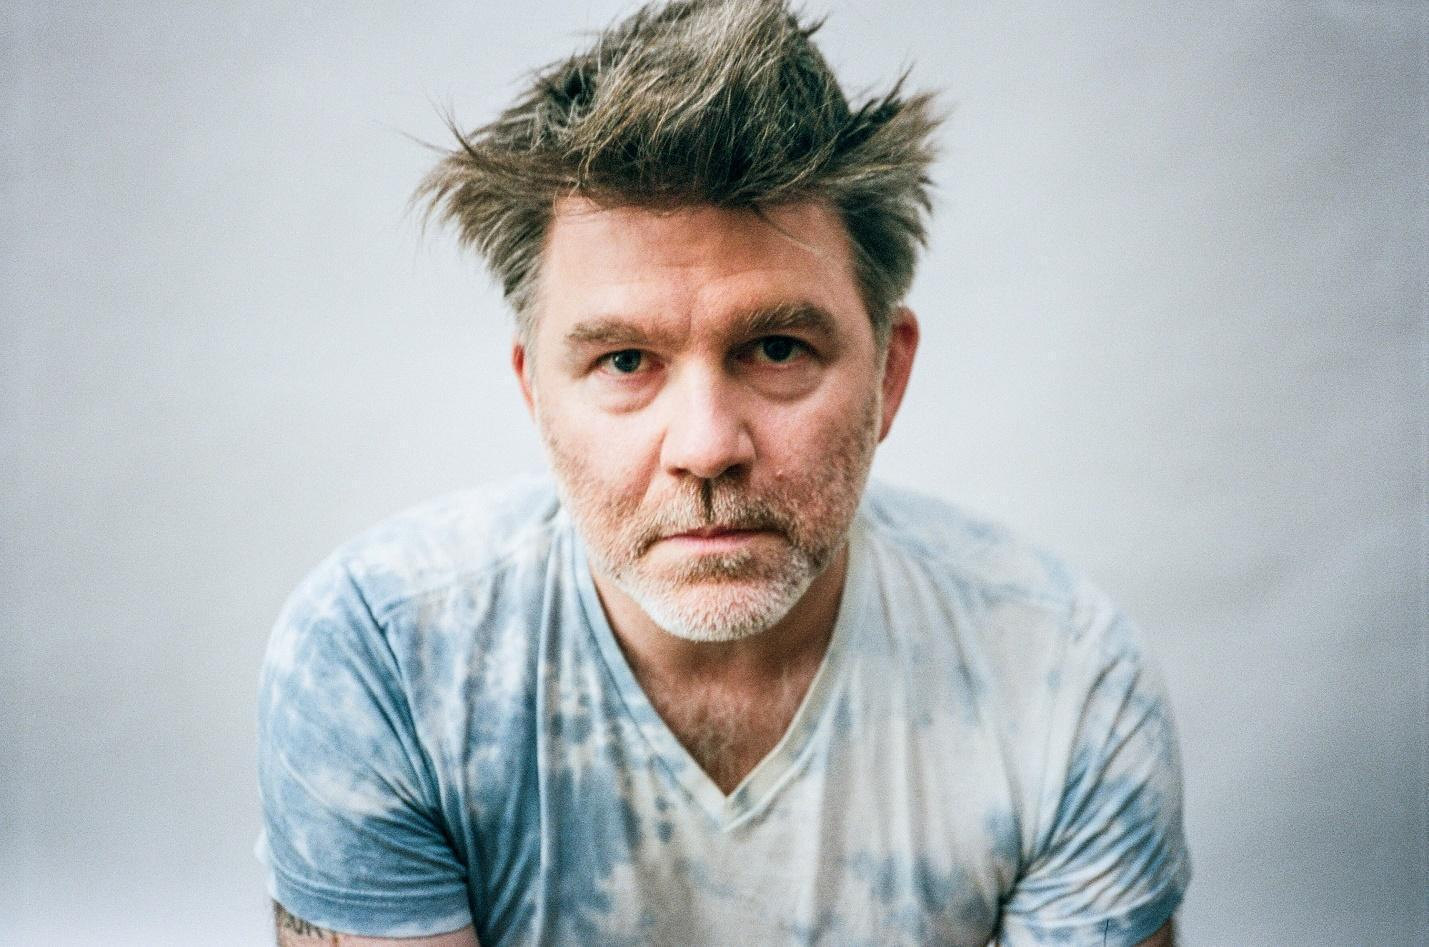 ANOTHER PLANET ENTERTAINMENT ANNOUNCES LCD SOUNDSYSTEM NEW YEAR’S EVE SHOWS – DECEMBER 30 & 31